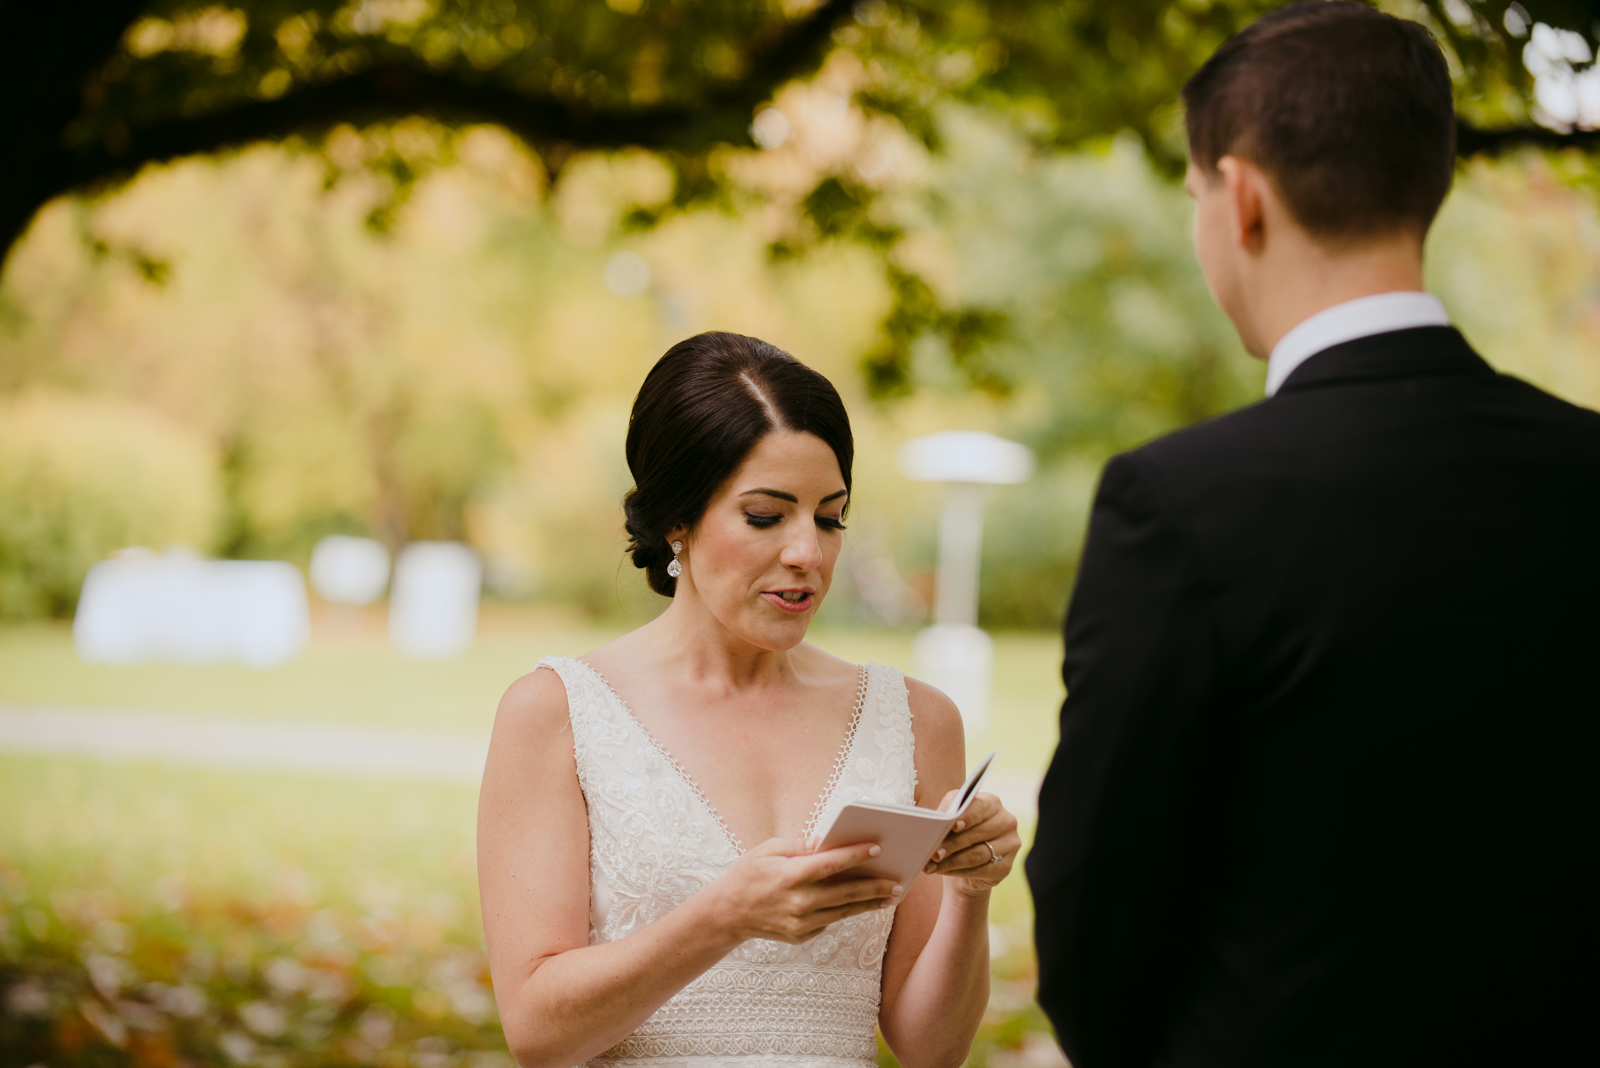 bride reading her vows from vow book during outdoor wedding ceremony